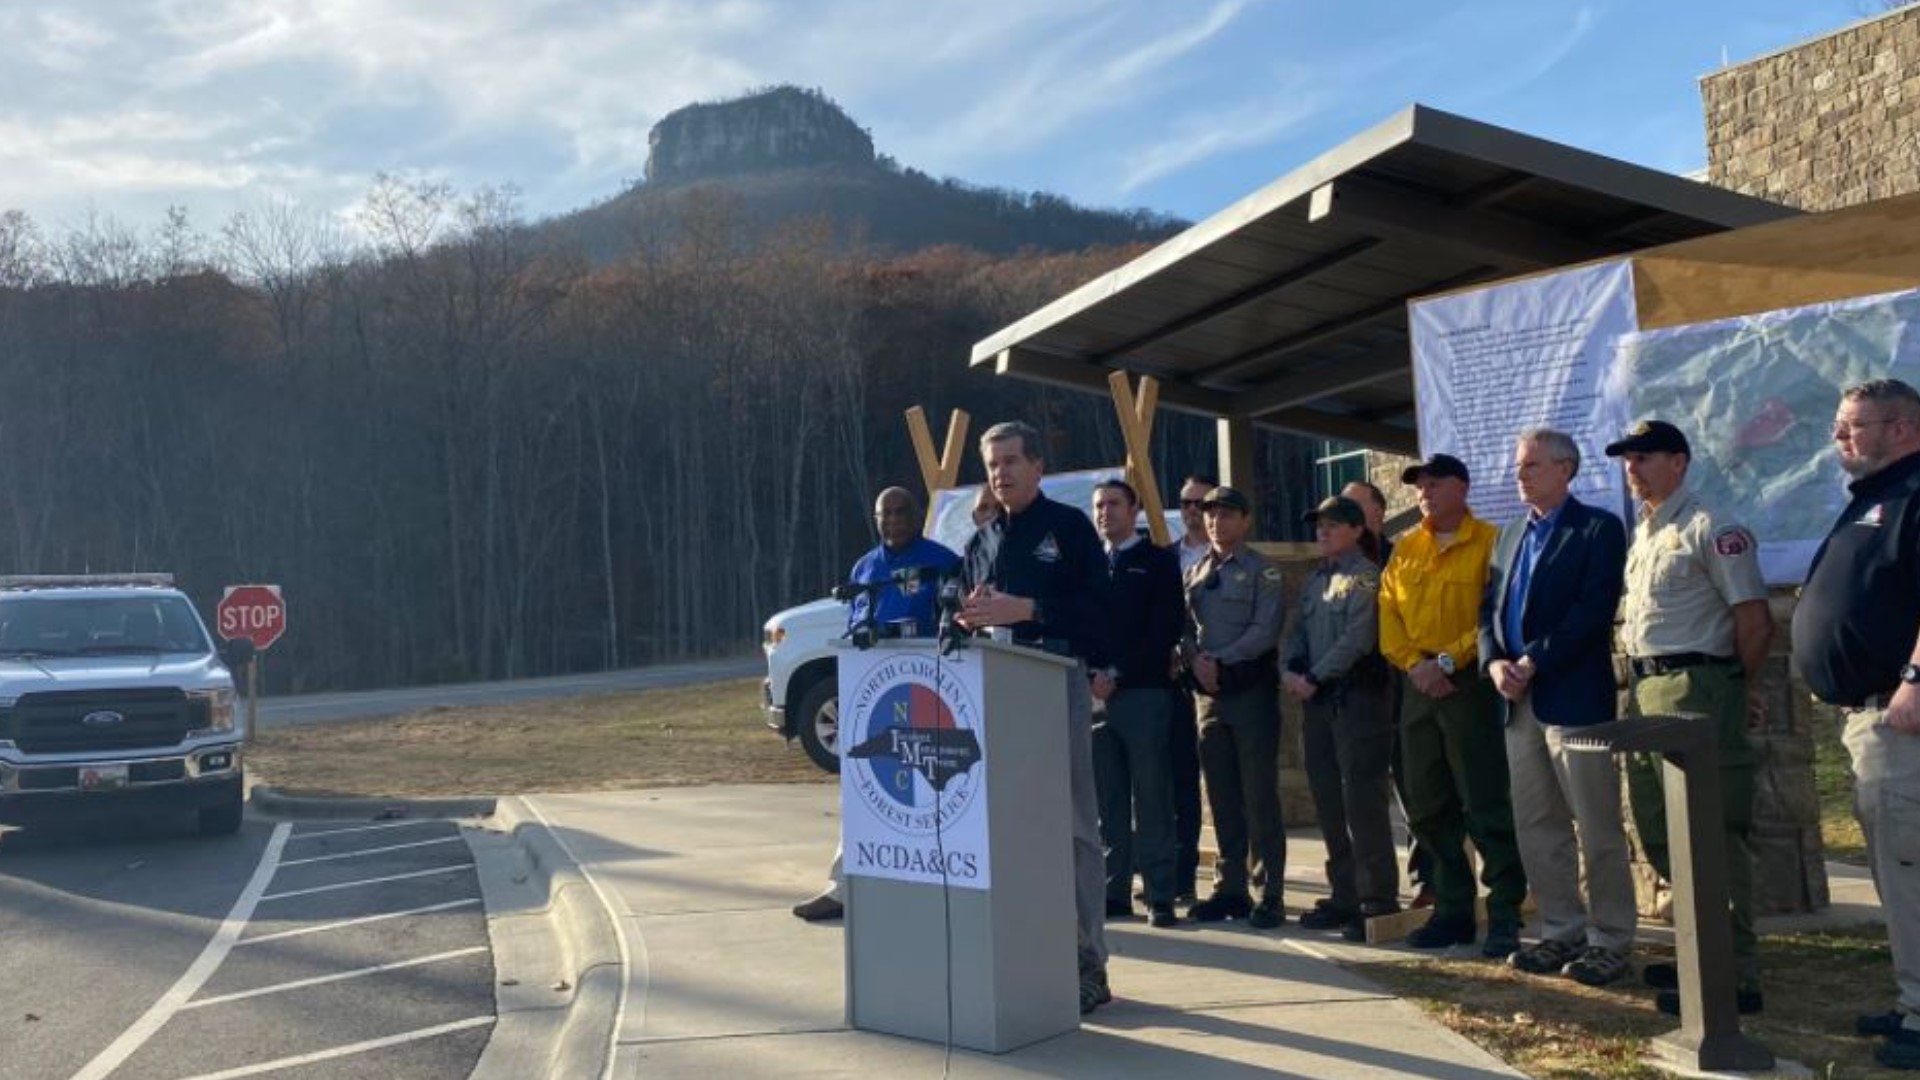 Gov. Roy Cooper said, "We can bounce back from this," while talking about the wildfire damage at Pilot Mountain.